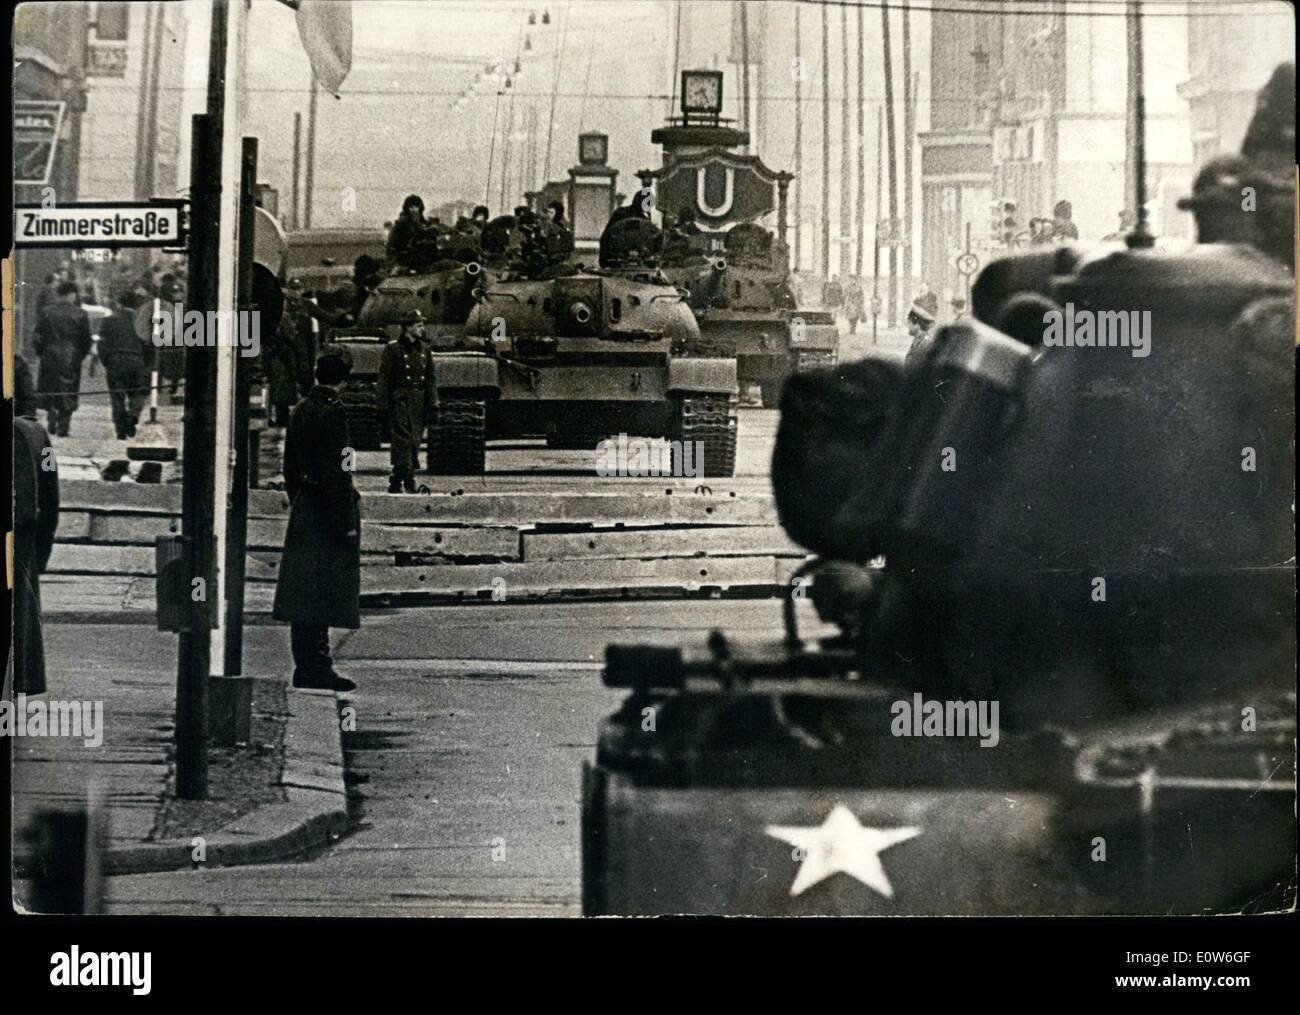 Oct. 10, 1961 - Soviet and American tanks via a vis in Friedrichstrasse: In this weekend at the Sector border cross Friedrichstrasse in Berlin Soviet and American tanks were gone in position on right wide for demonstrating their power. The Soviet ''(Illegible)'' position at 10 hours 40, the American ''(Illegible)'' the border cross. Photo shows In background the Soviet tanks of the tp T 54, in foreground American tank of the typ Patton. Stock Photo